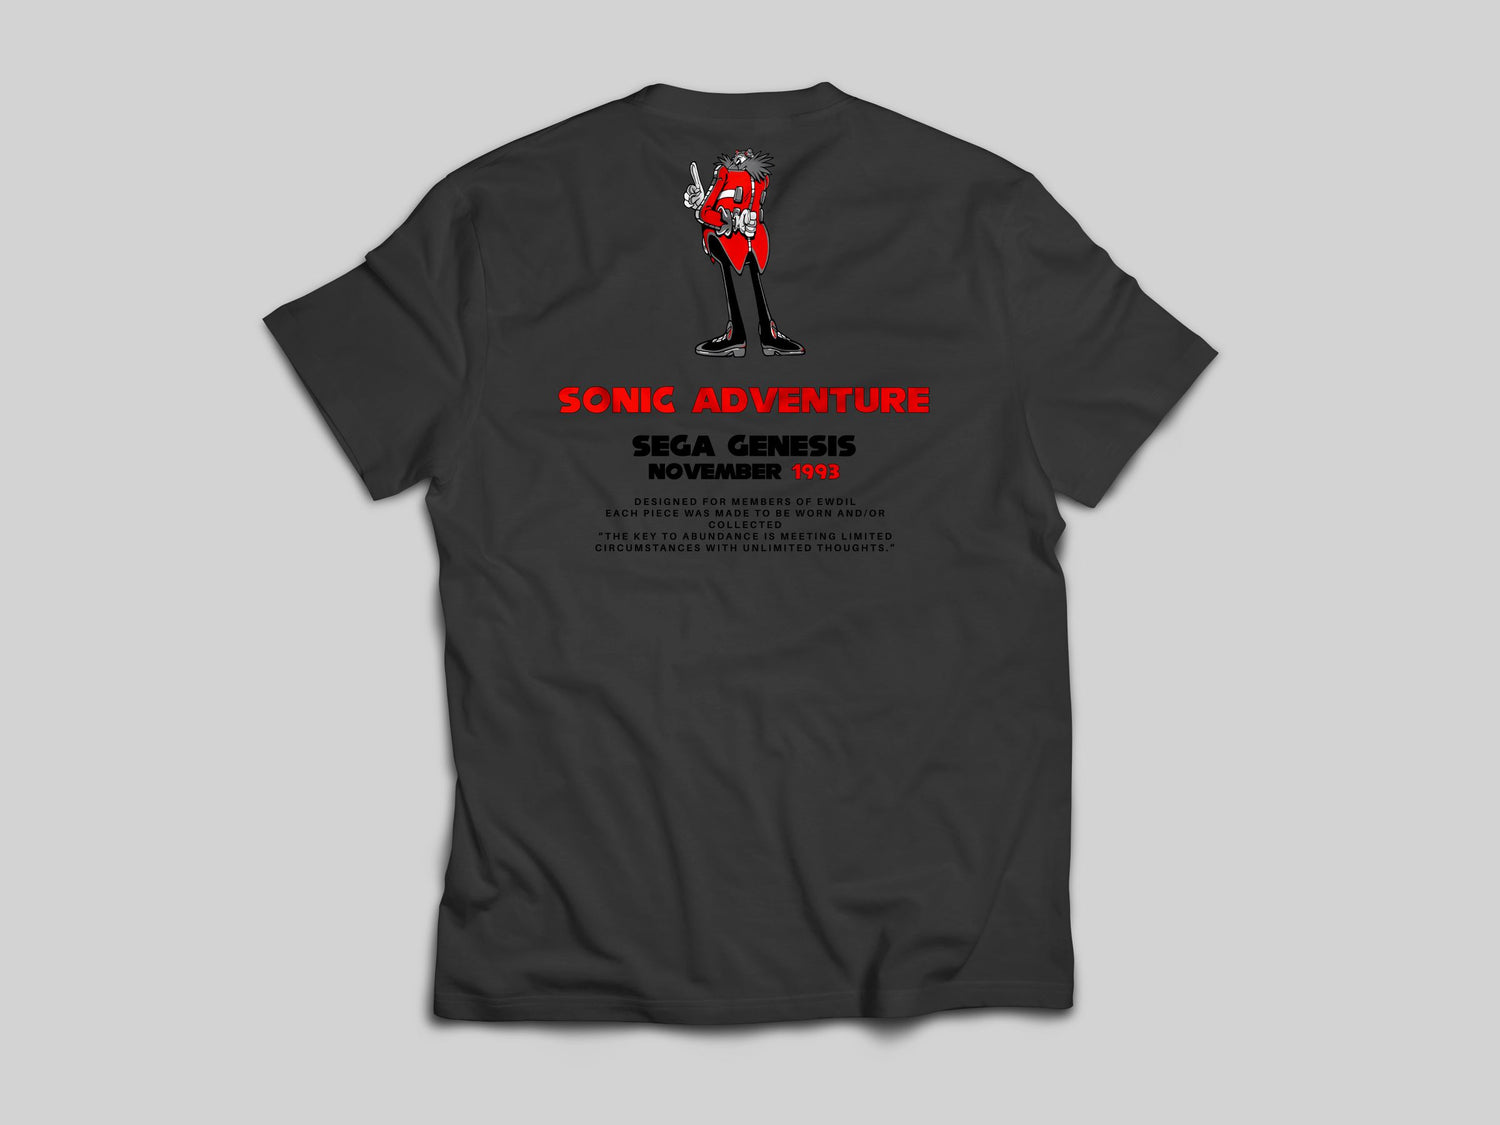 L1MITED.SUPPLY DR. ROBOTNIK'S V2 "SOINC" ADVENTURE HEATHER GRAY TEES L1MITED SUPPLY 